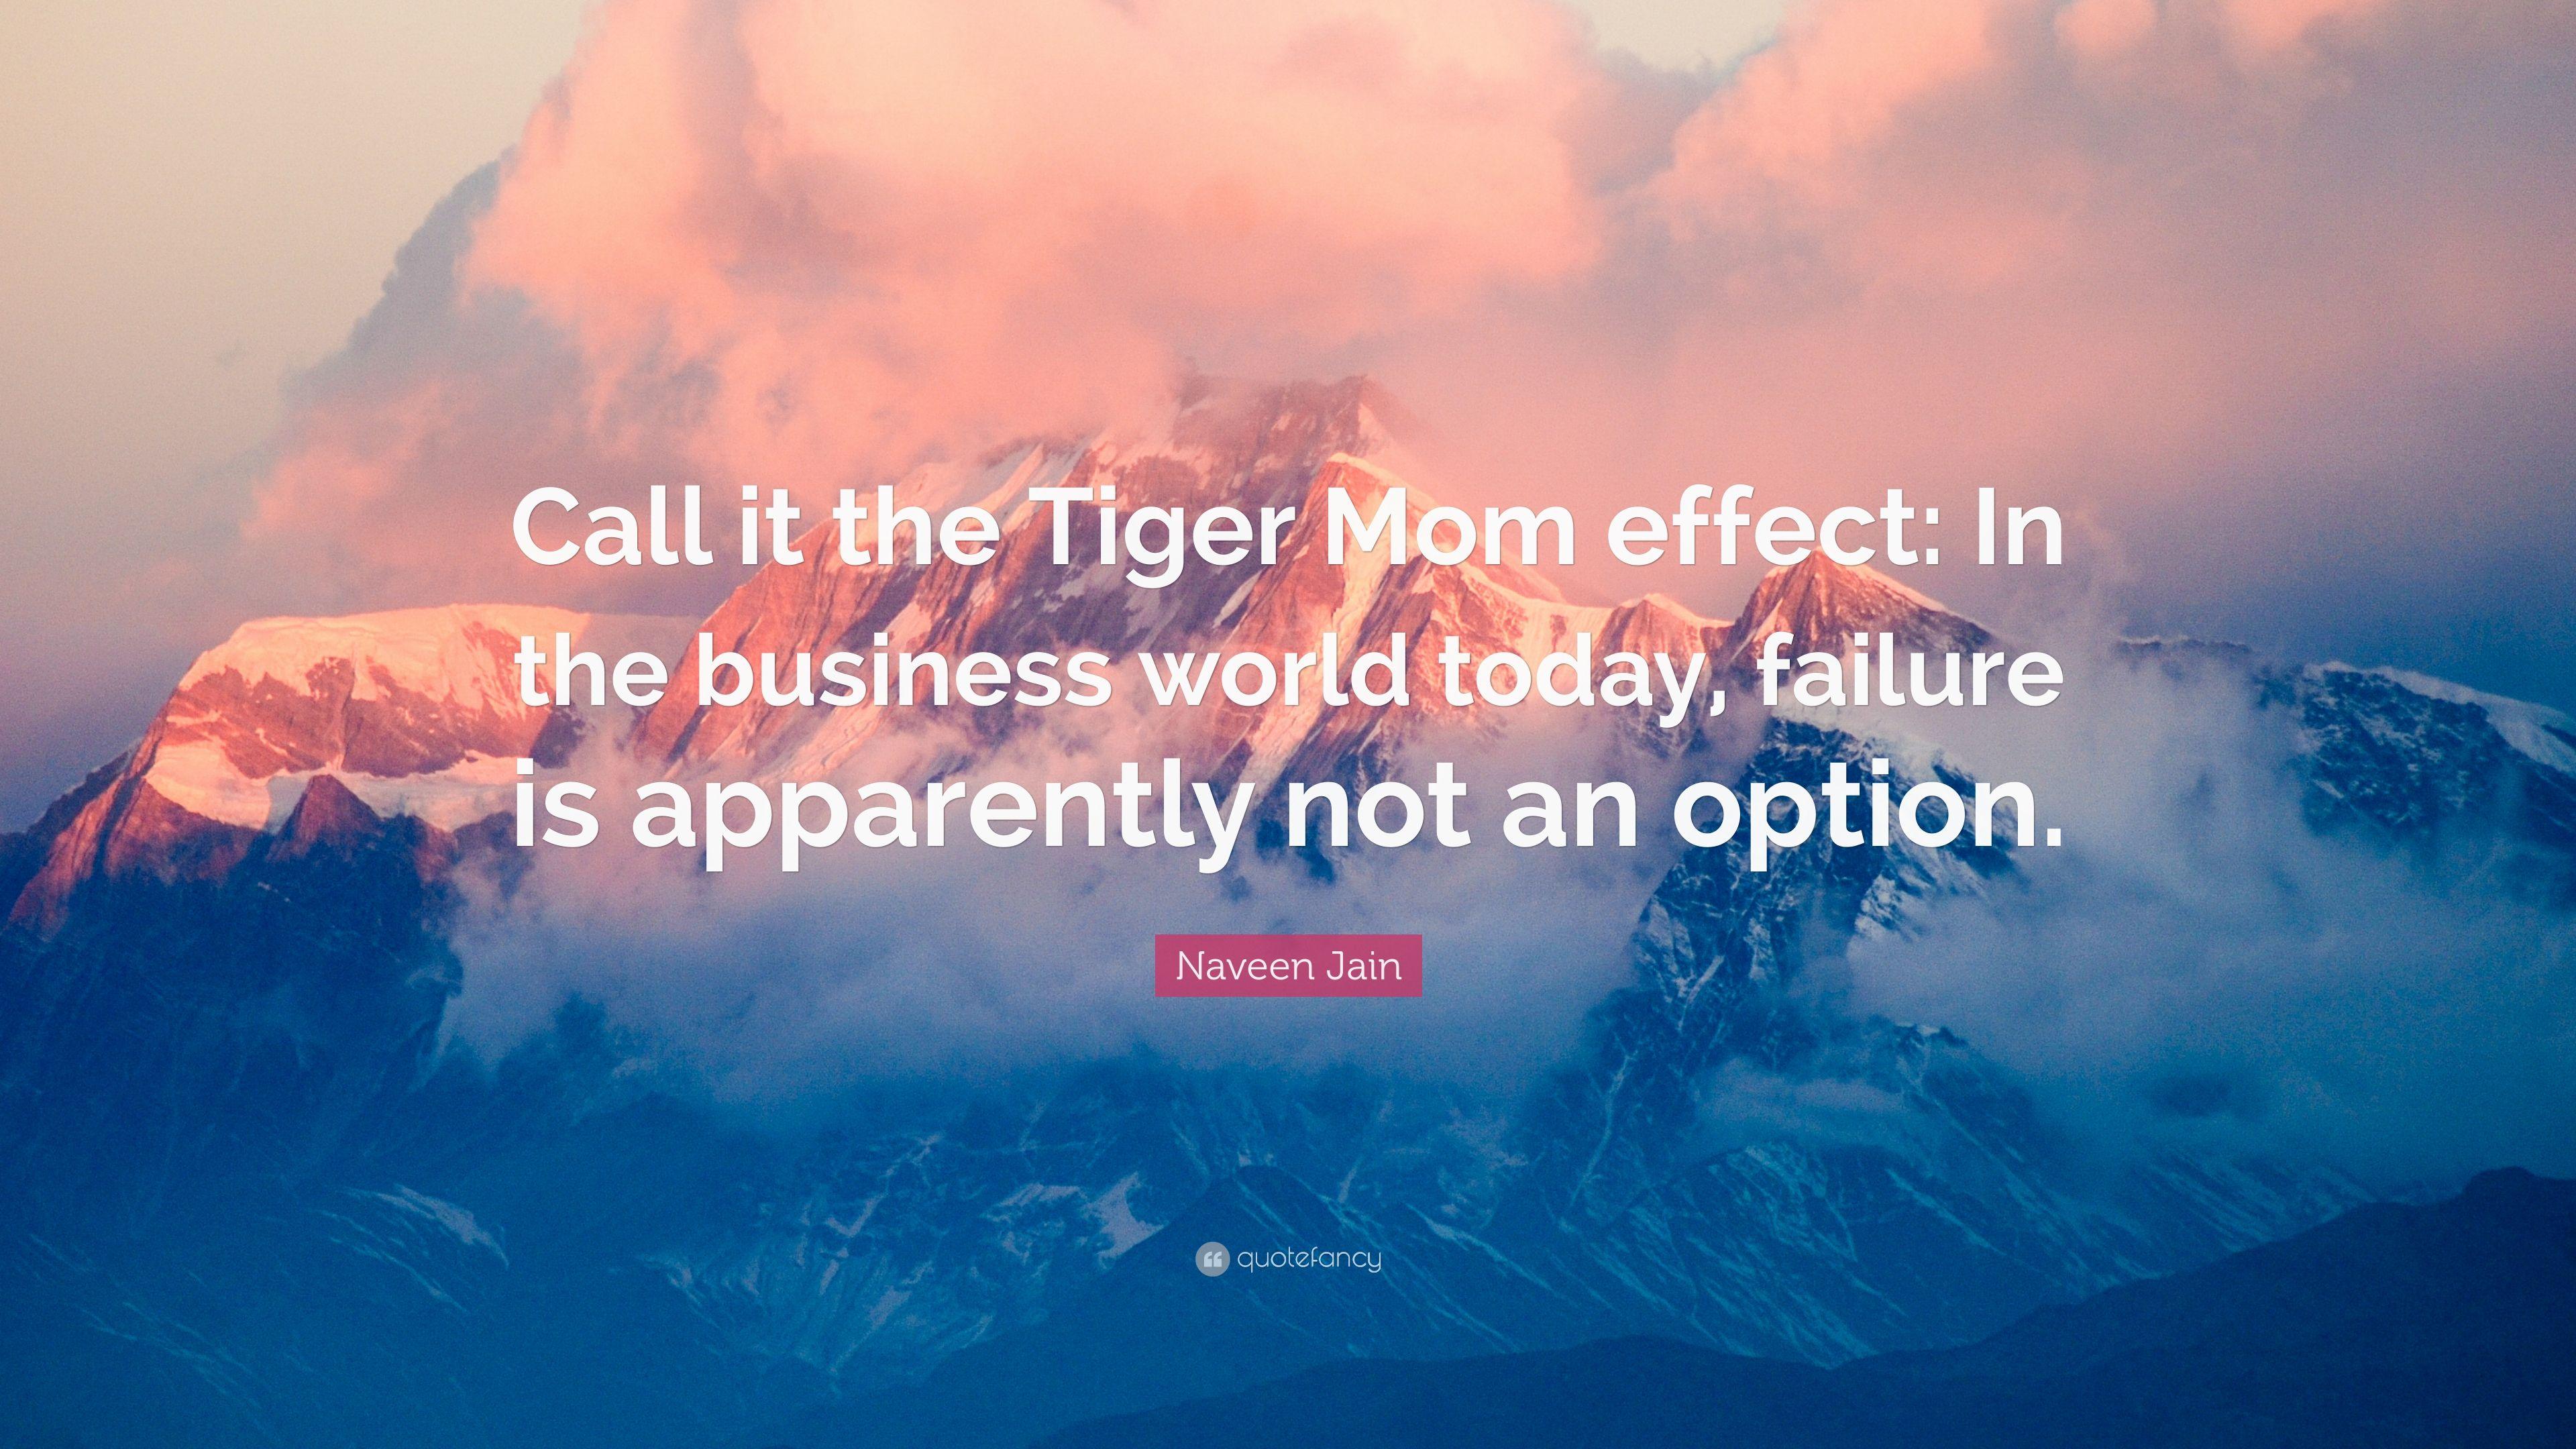 Naveen Jain Quote: “Call it the Tiger Mom effect: In